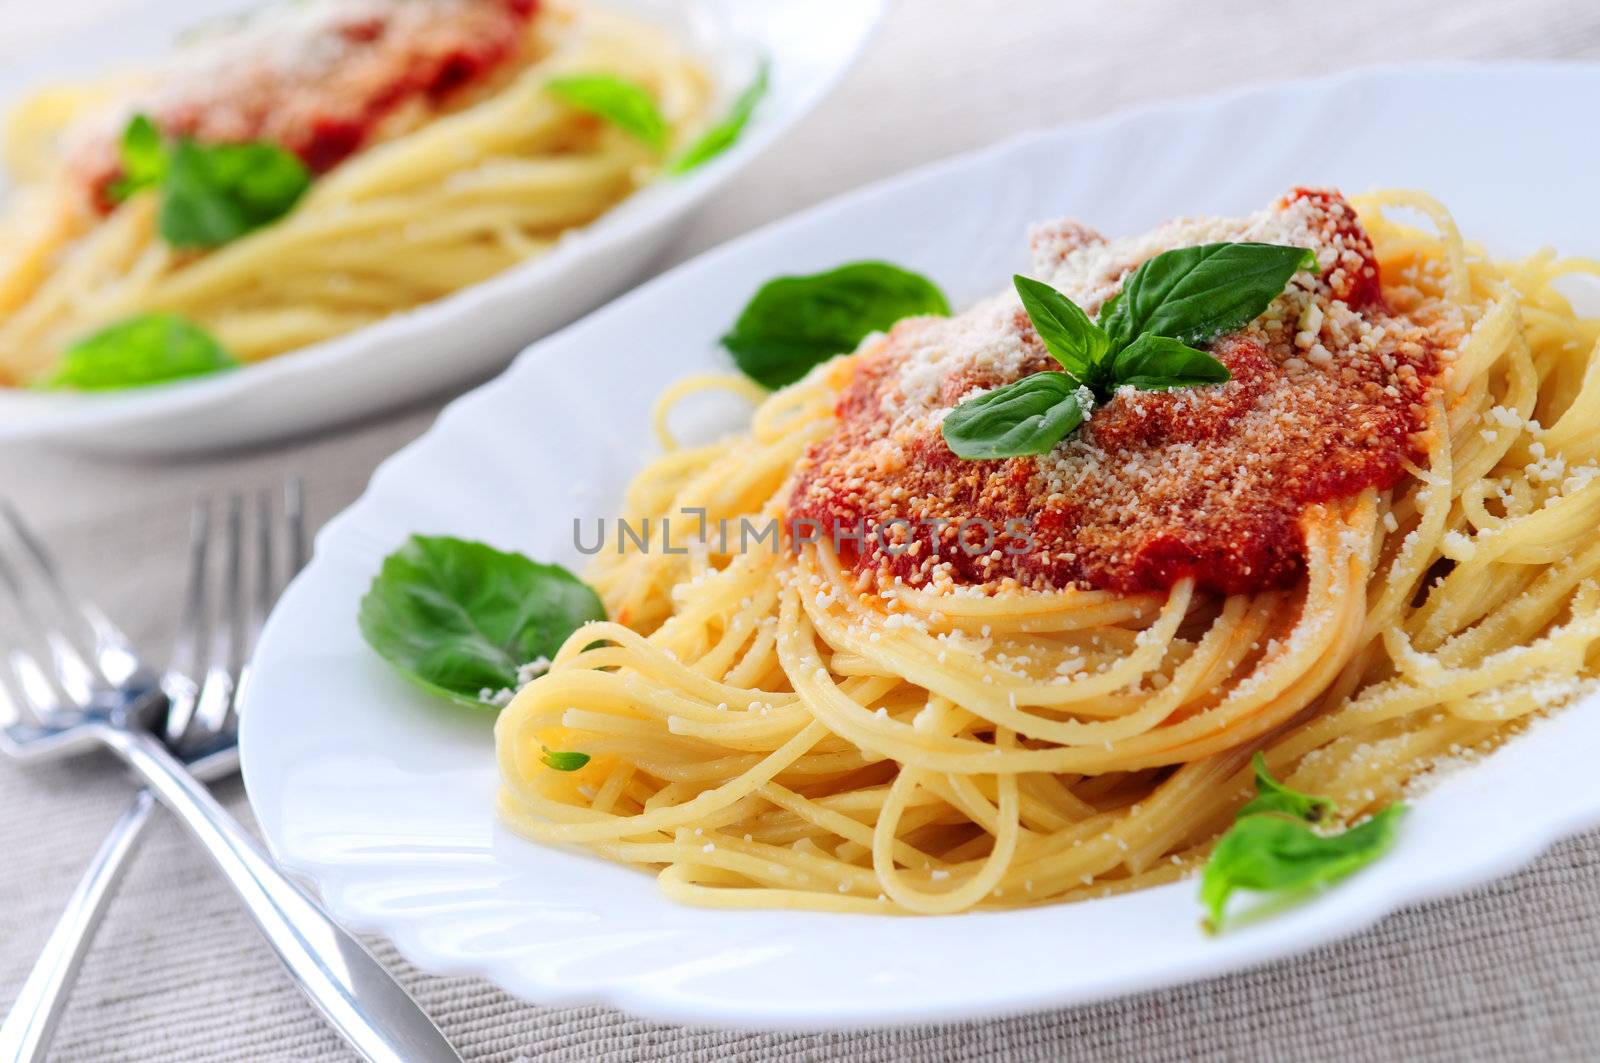 Pasta and tomato sauce by elenathewise